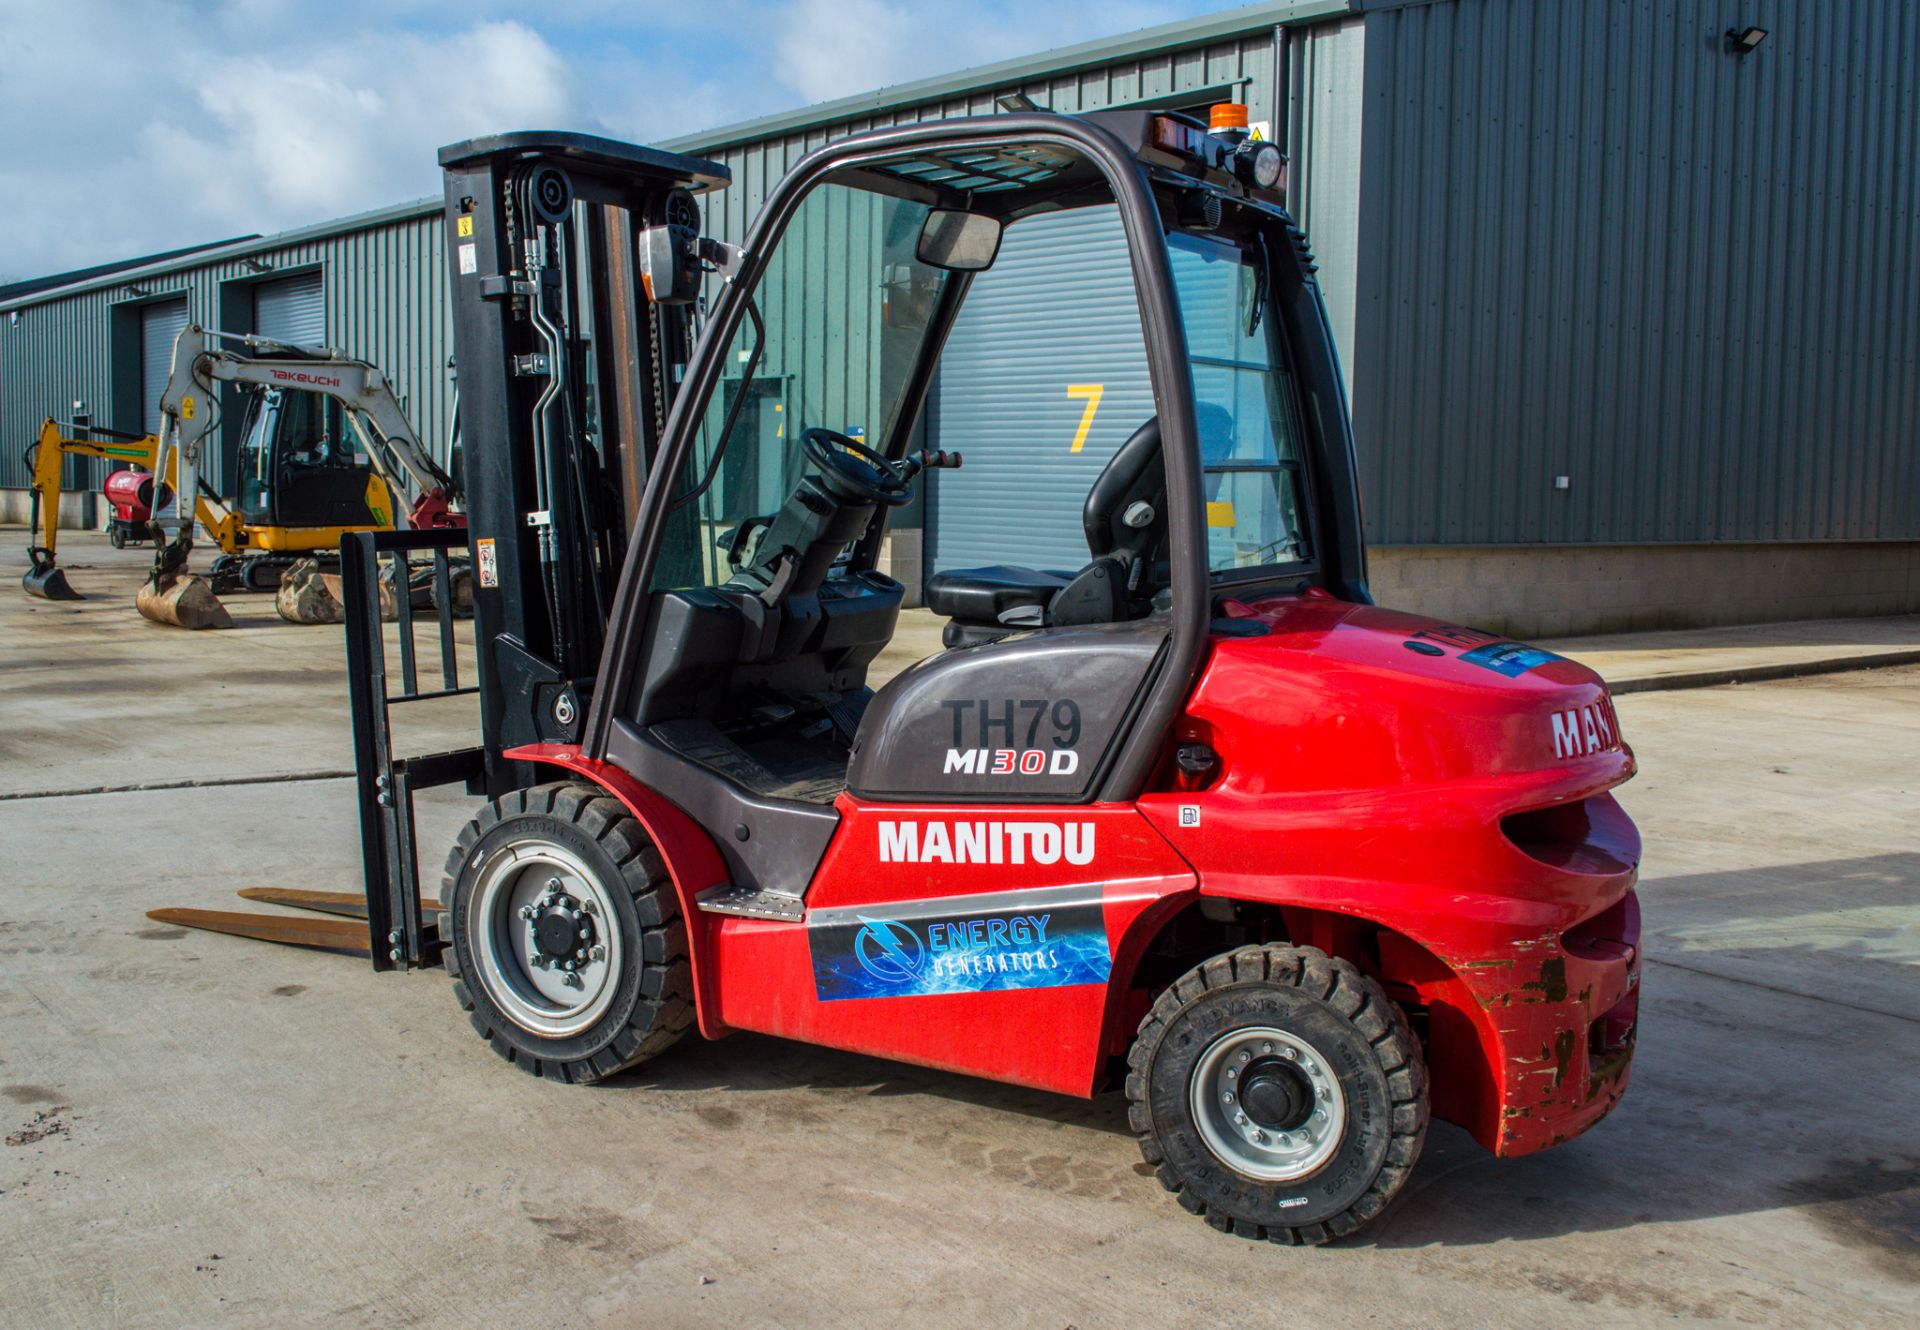 Manitou MI 30D 3 tonne diesel fork lift truck Year: 2020 S/N: 877370 Recorded Hours: 399 TH79 - Image 4 of 18